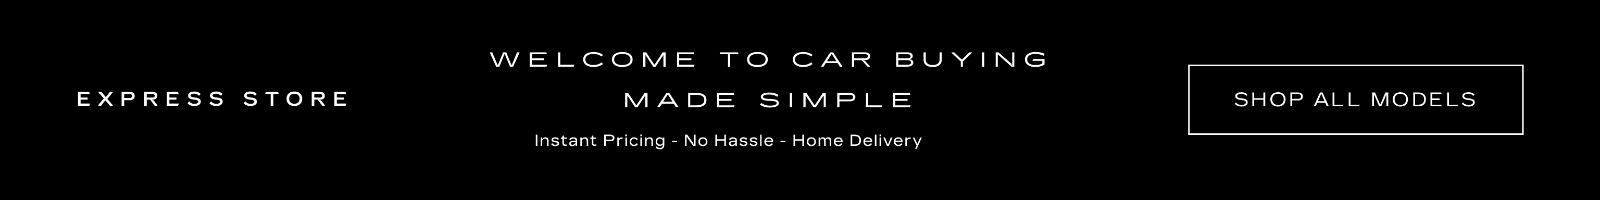 Express Store WELCOME TO CAR BUYING MADE SIMPLE Instant Pricing - No Hassle - Home Delivery Start Shopping